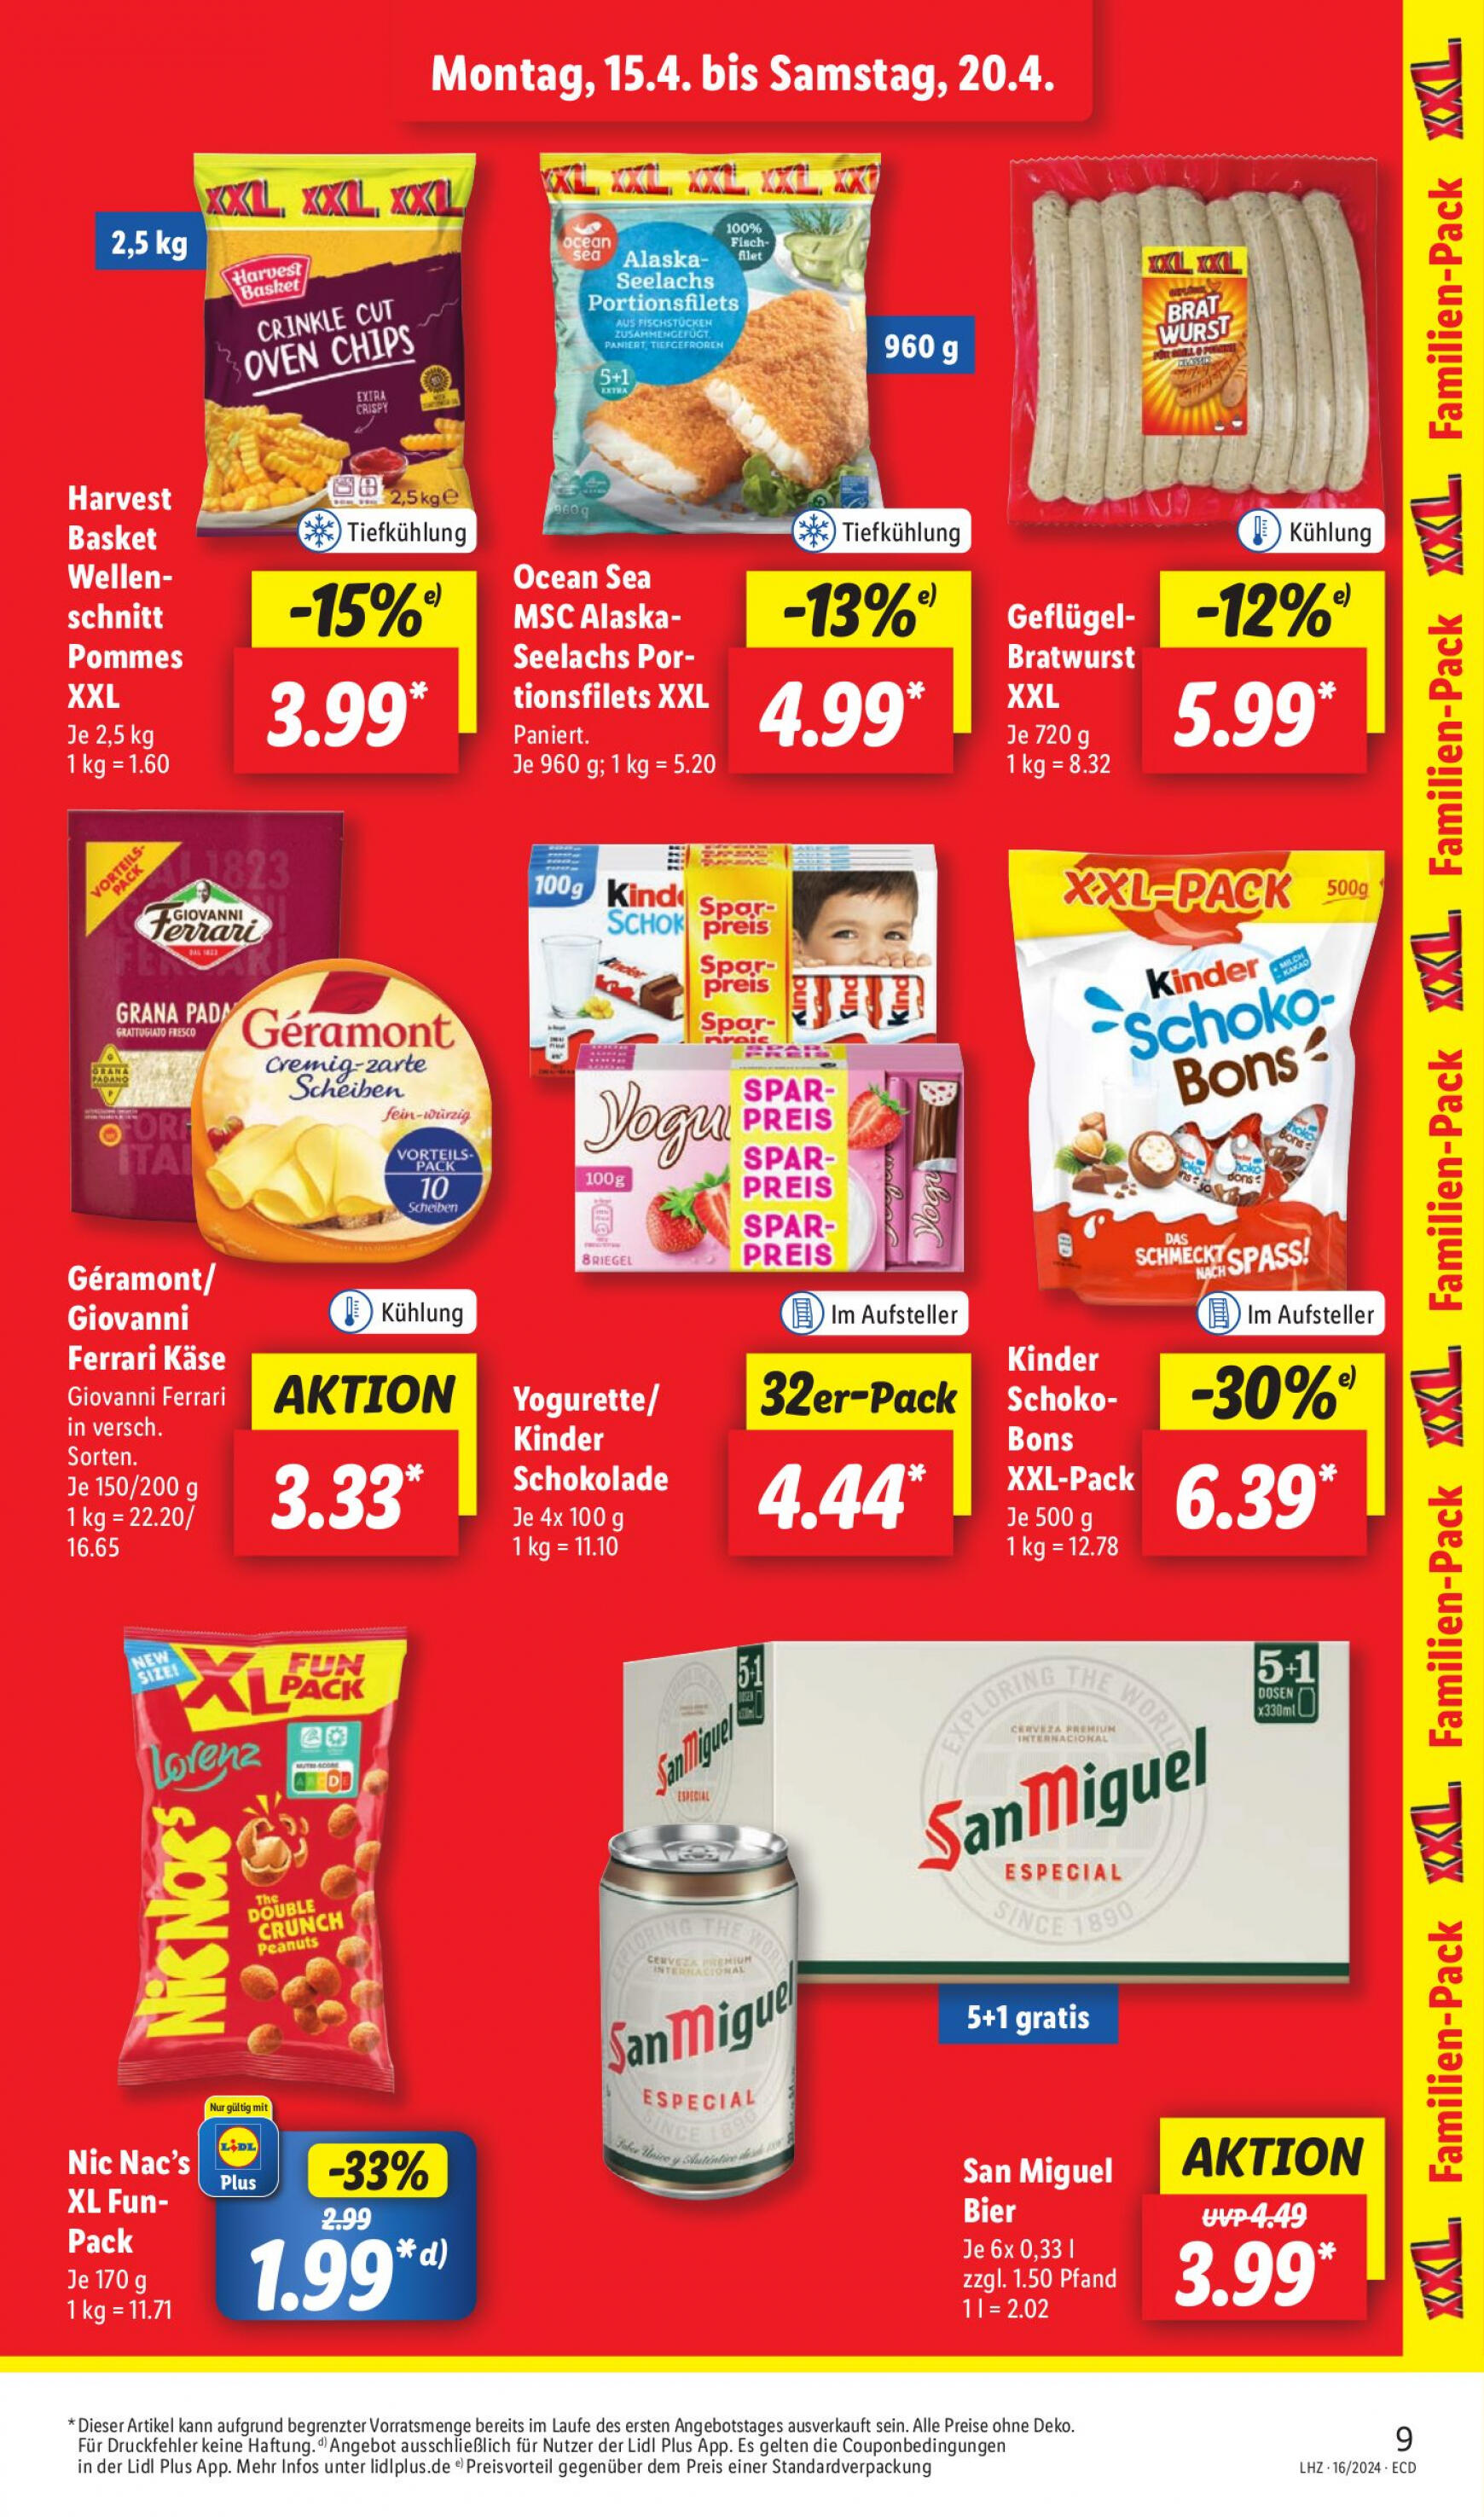 lidl - Flyer Lidl aktuell 15.04. - 20.04. - page: 13